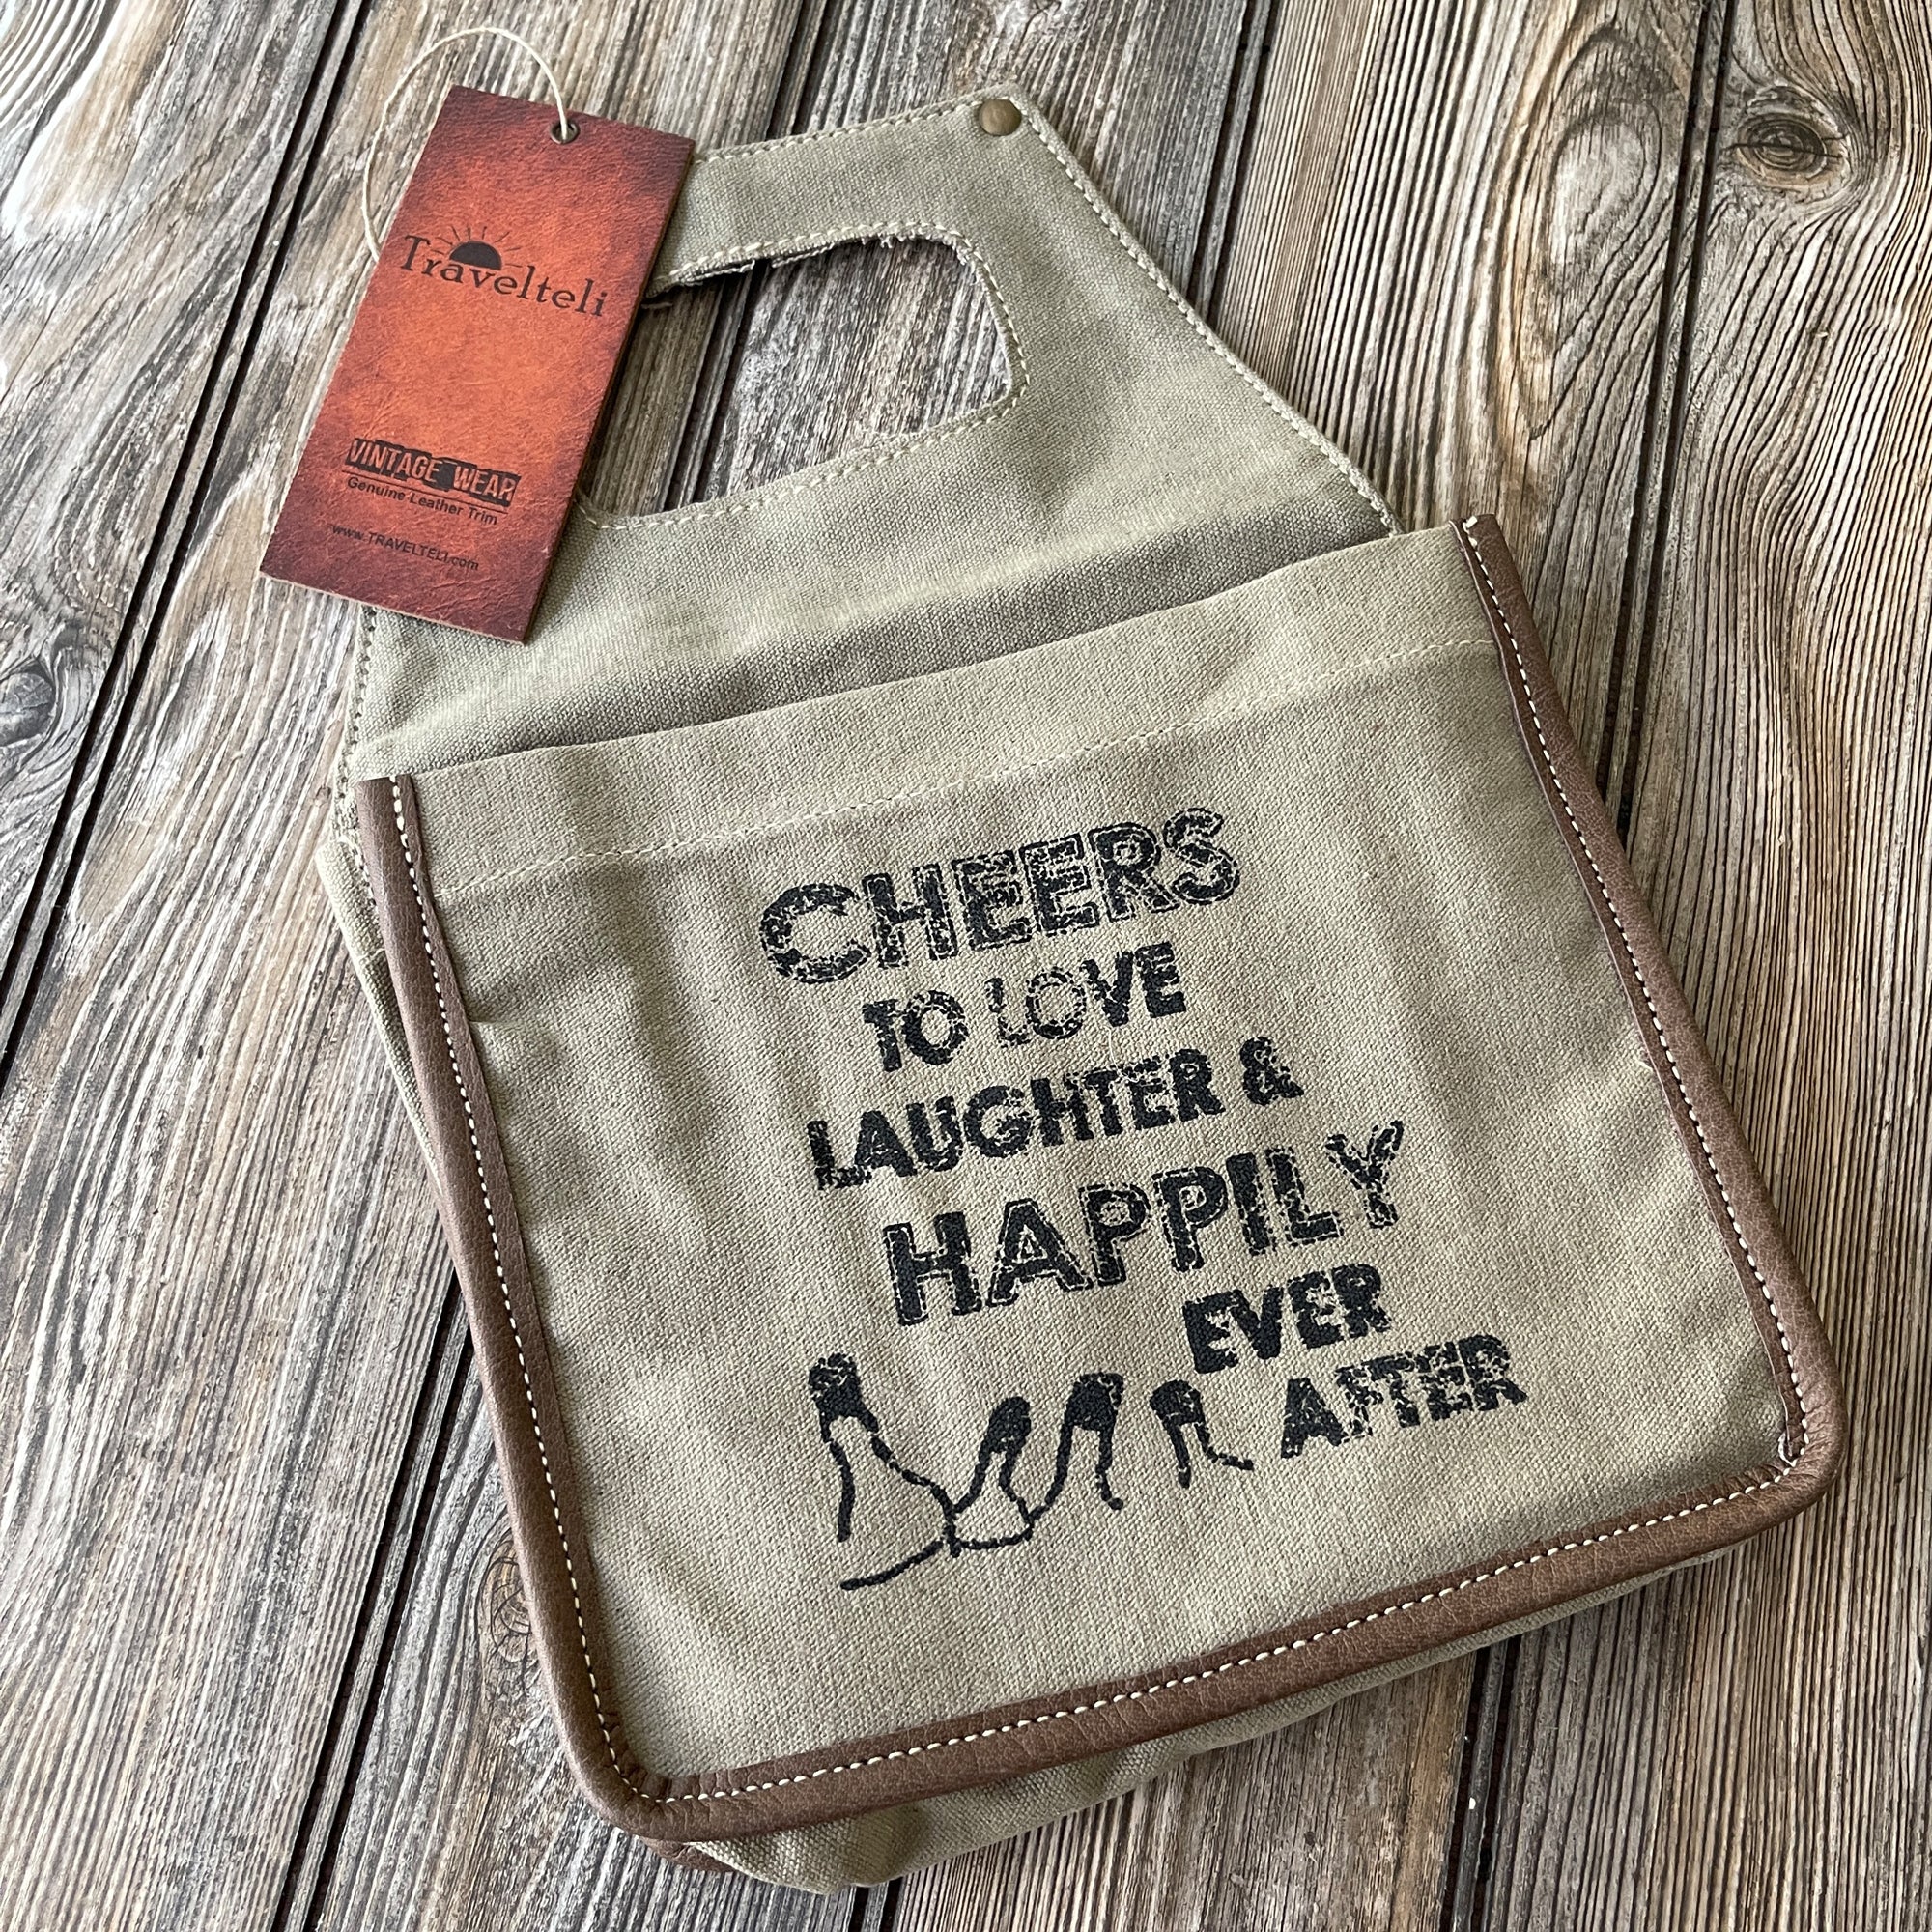 Handmade Upcycled Canvas Beer Carrier Caddy Bag